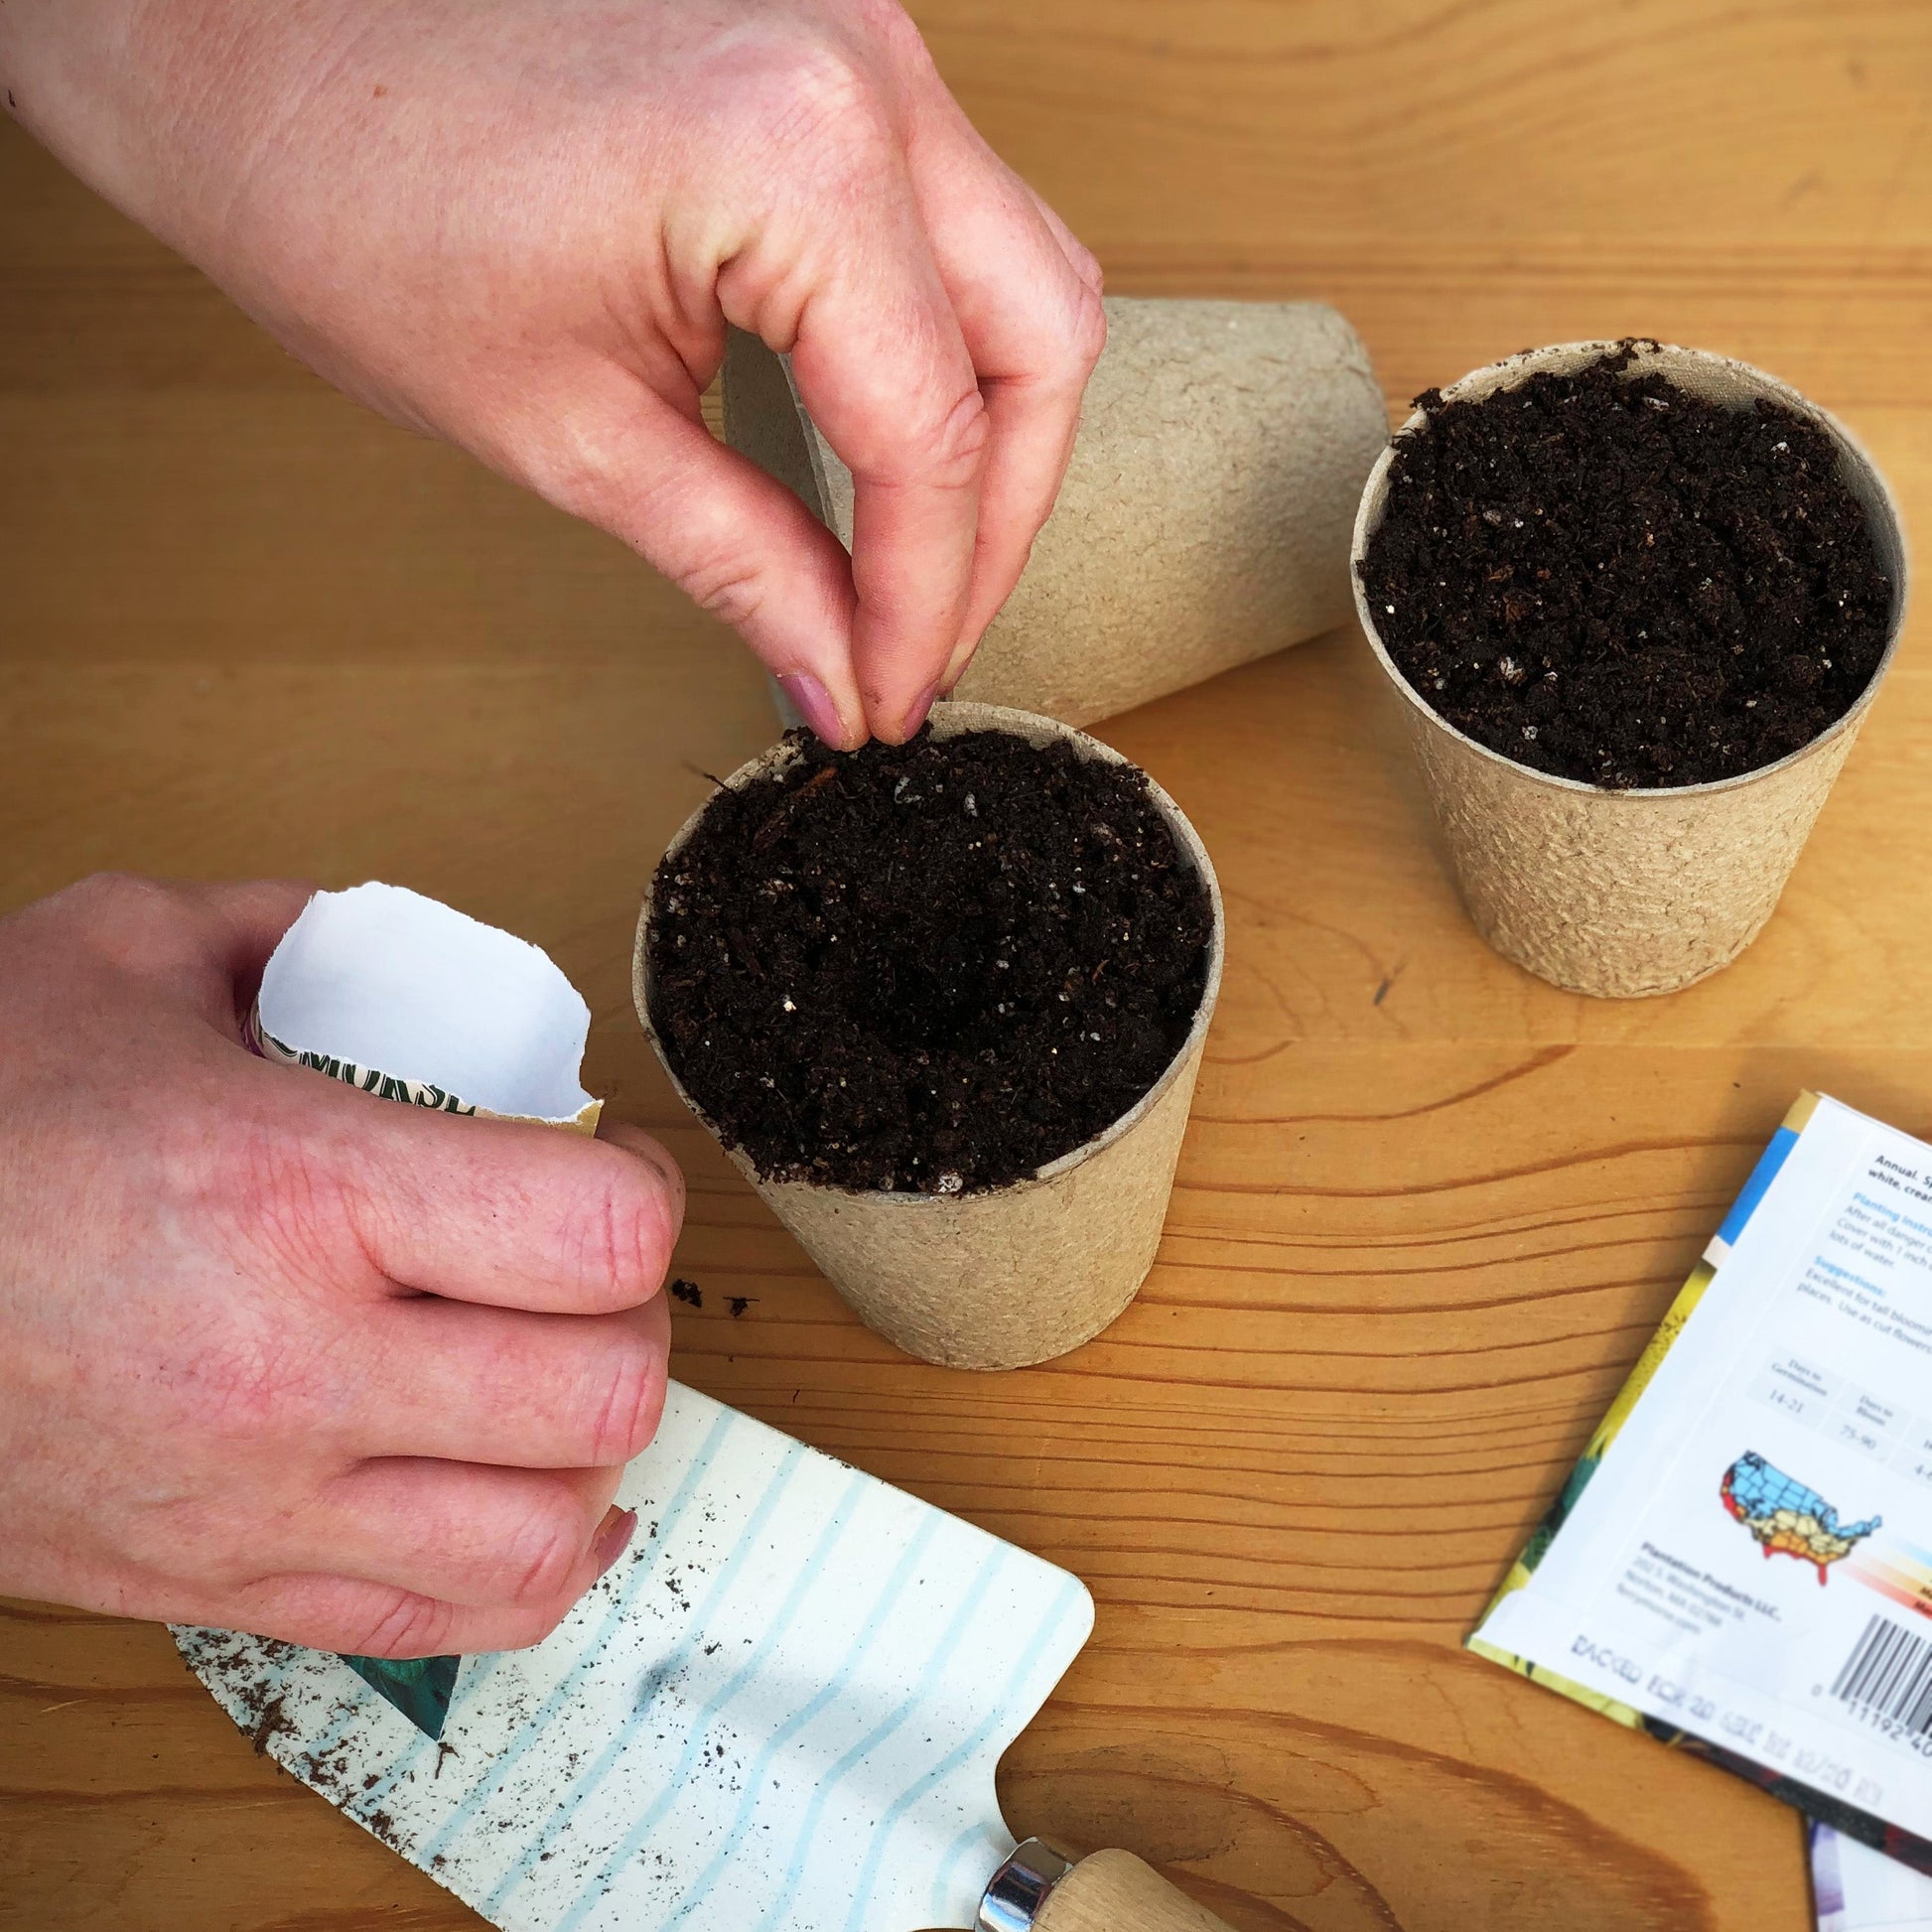 Start your American Flag Leek seeds in biodegradable peat pots or paper pots filled with Jiffy Mix.